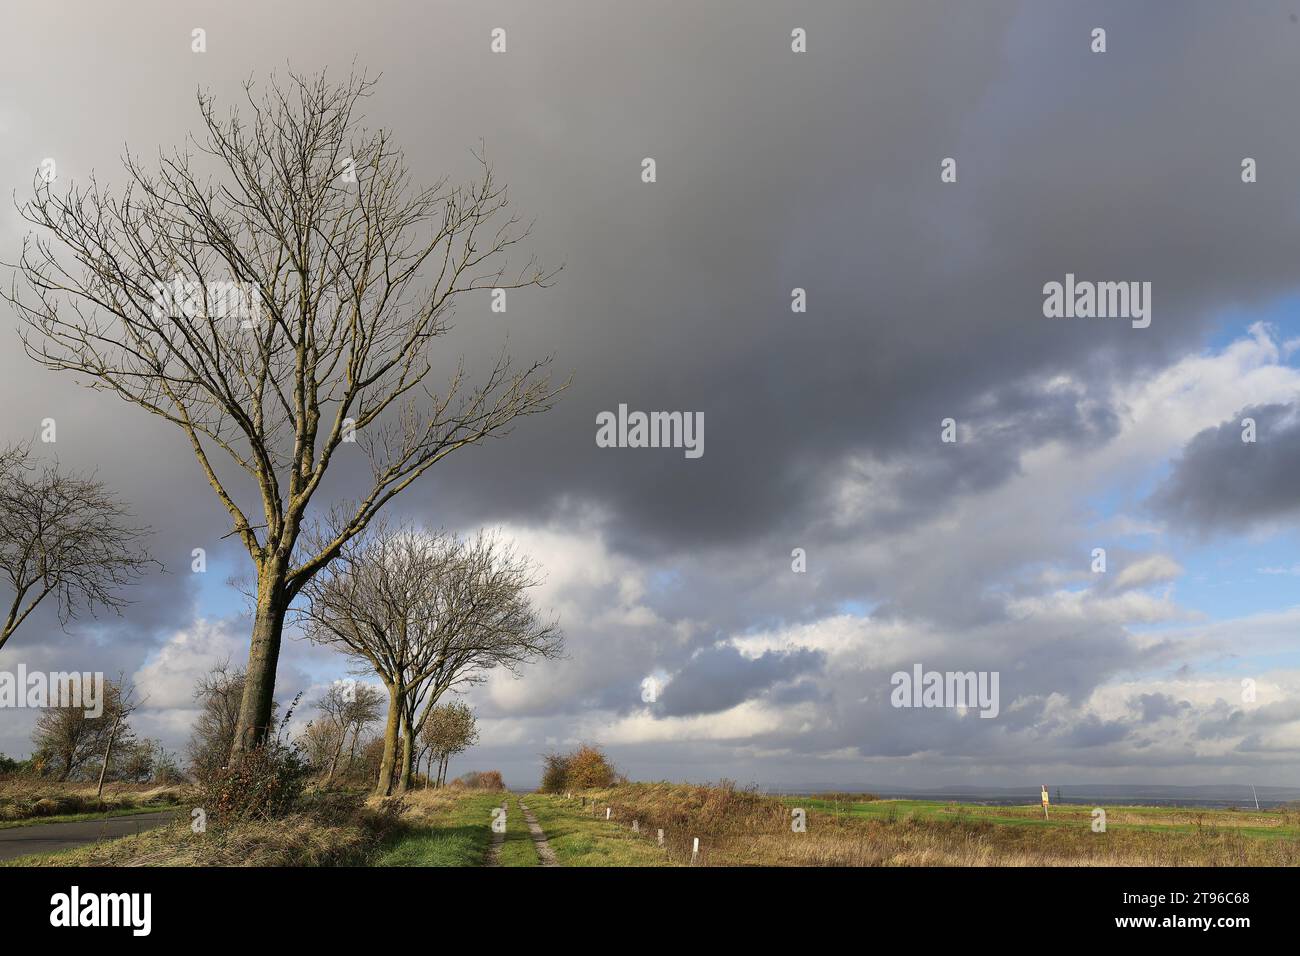 Dark clouds drifting over a meadow path in an autumnal landscape, wide-angle shot, copy space Stock Photo